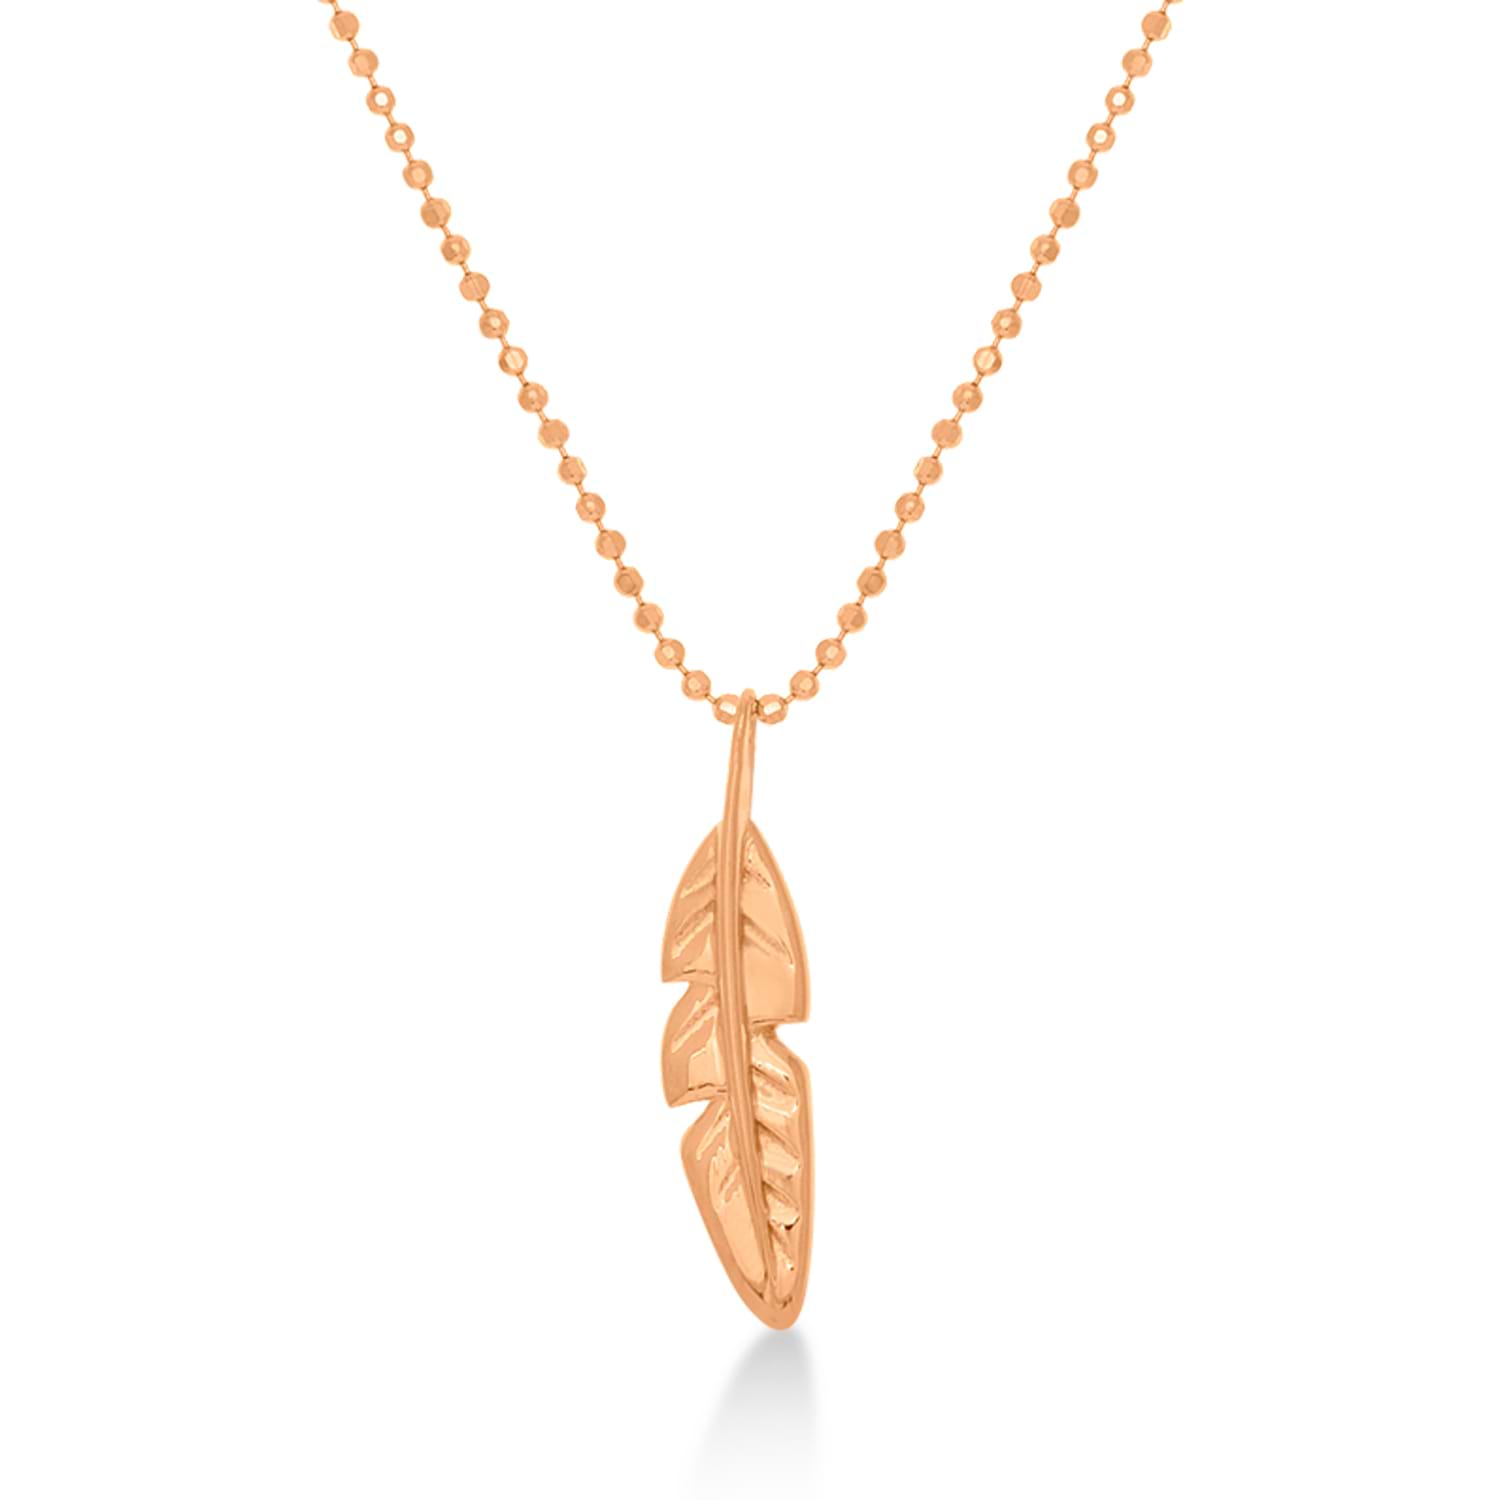 Feather Charm Pendant Necklace 14k Rose Gold